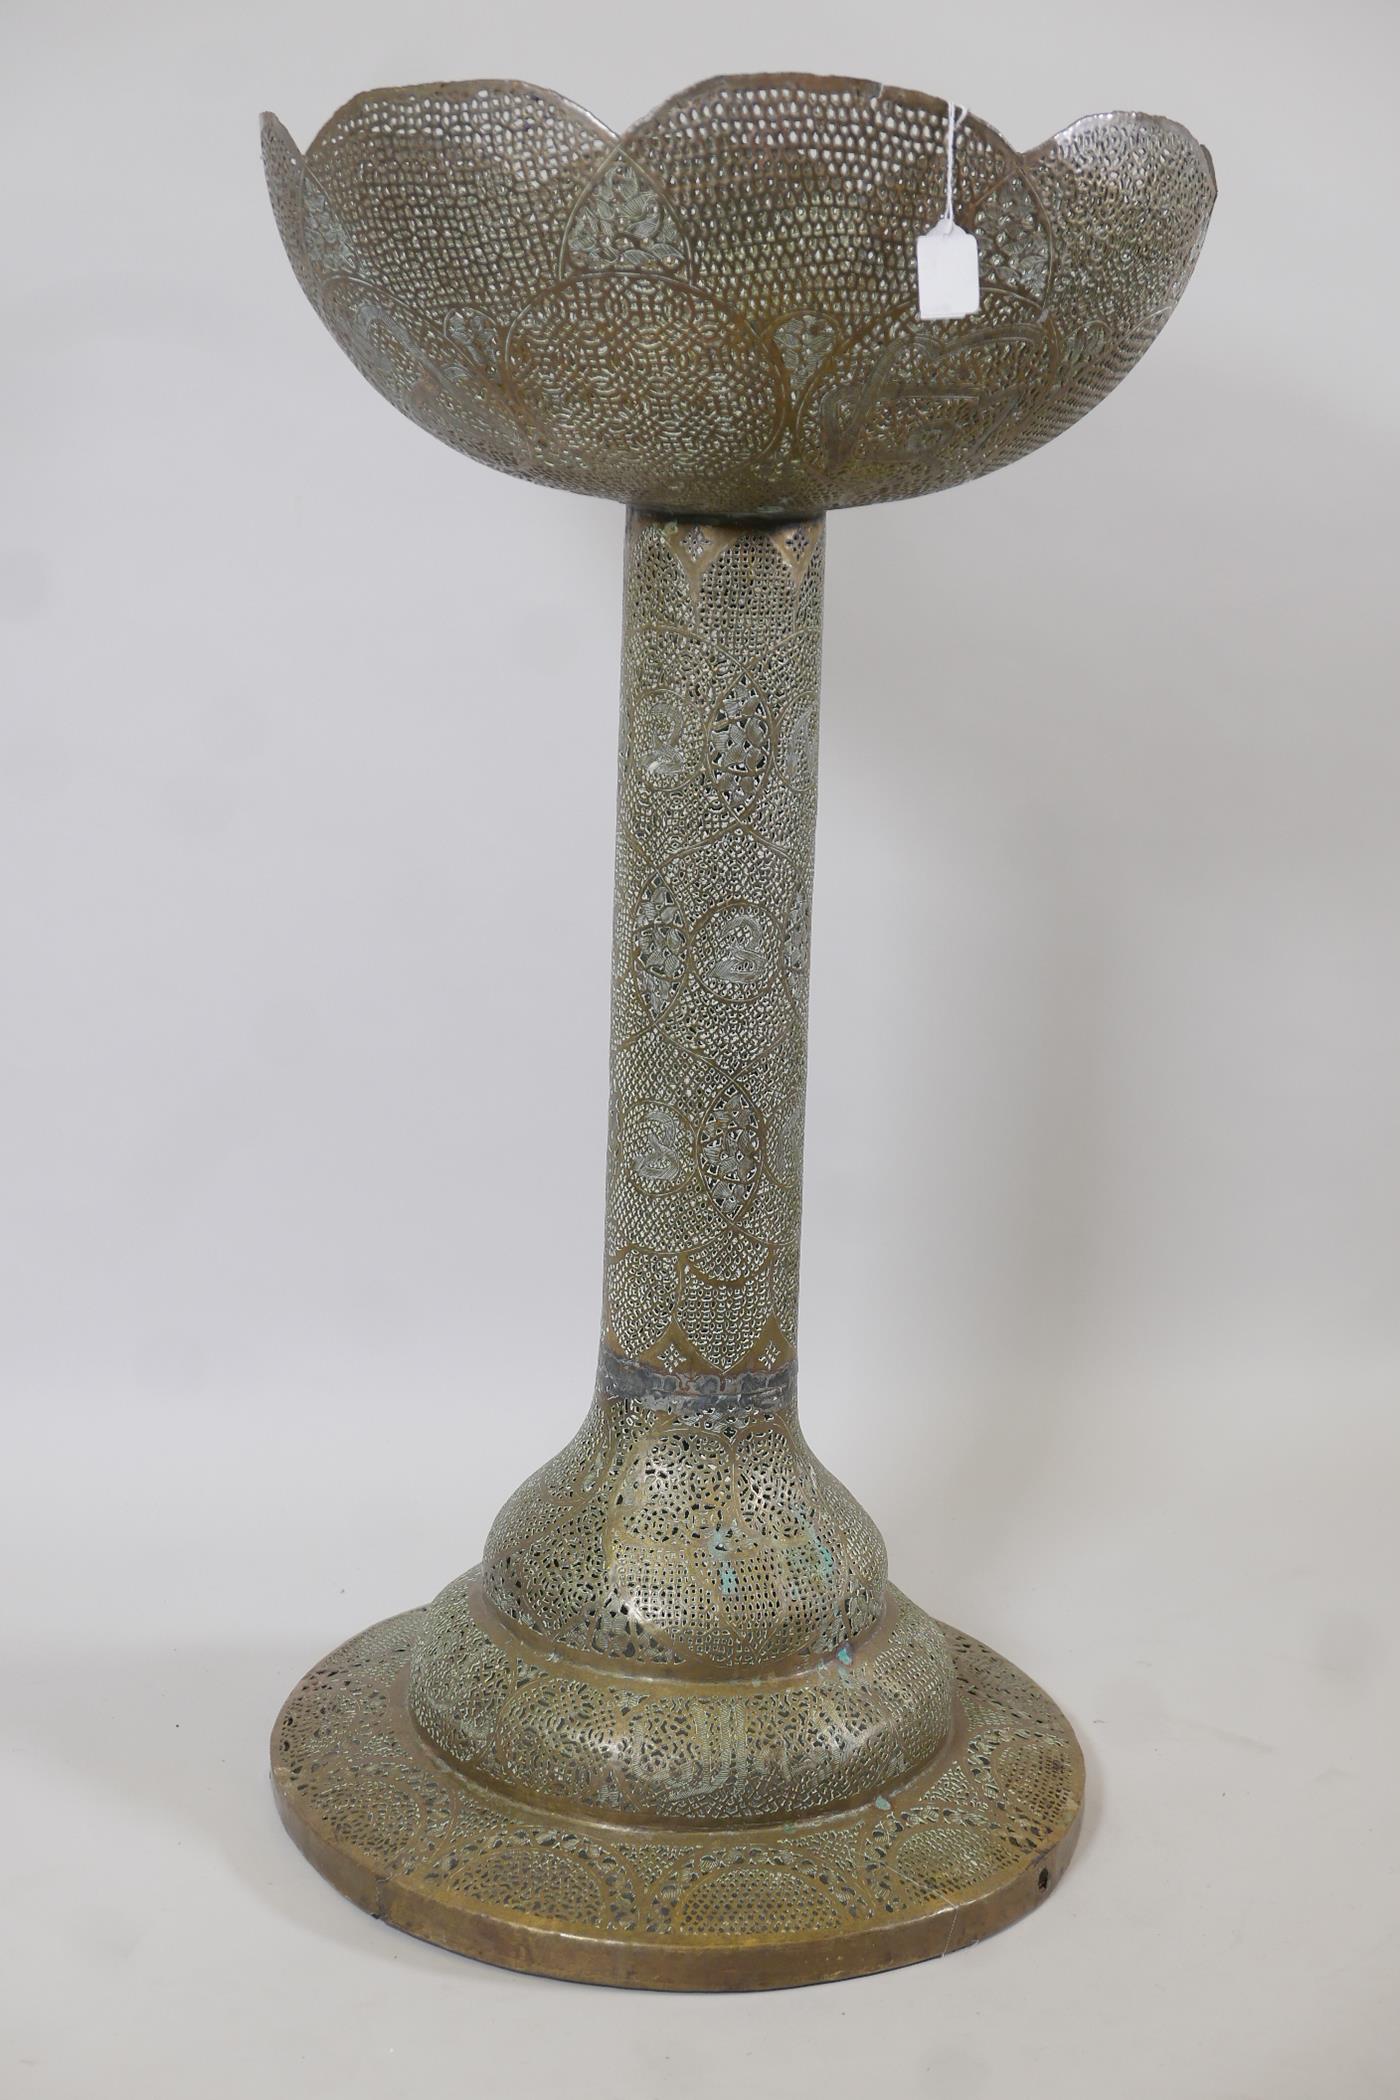 An Indo-Persian pierced brass pedestal with basket top decorated with script and flowers, 39" high